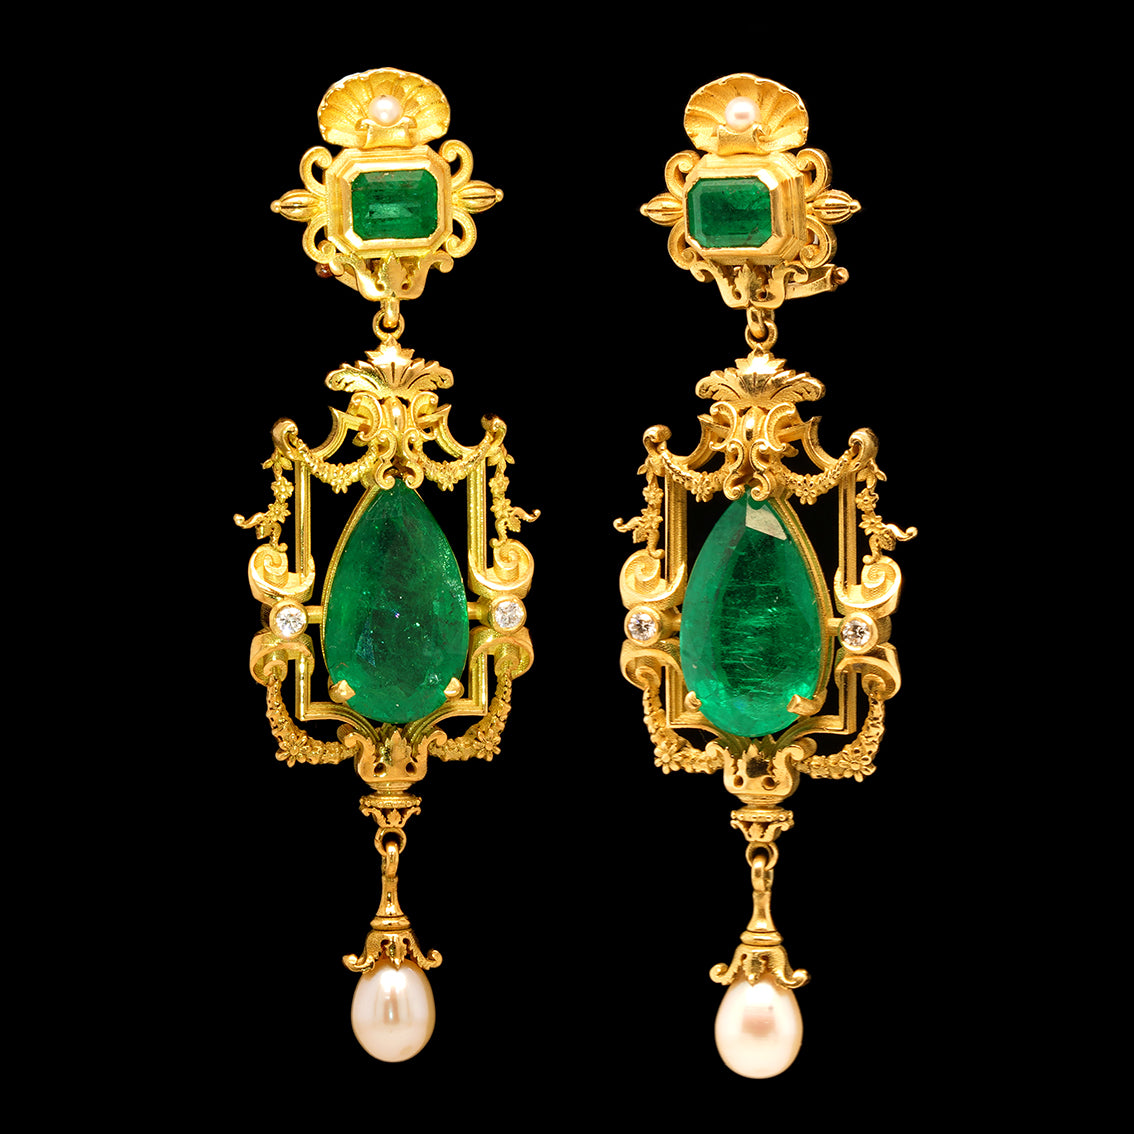 VENUS WITH A MIRROR EMERALD EARRINGS